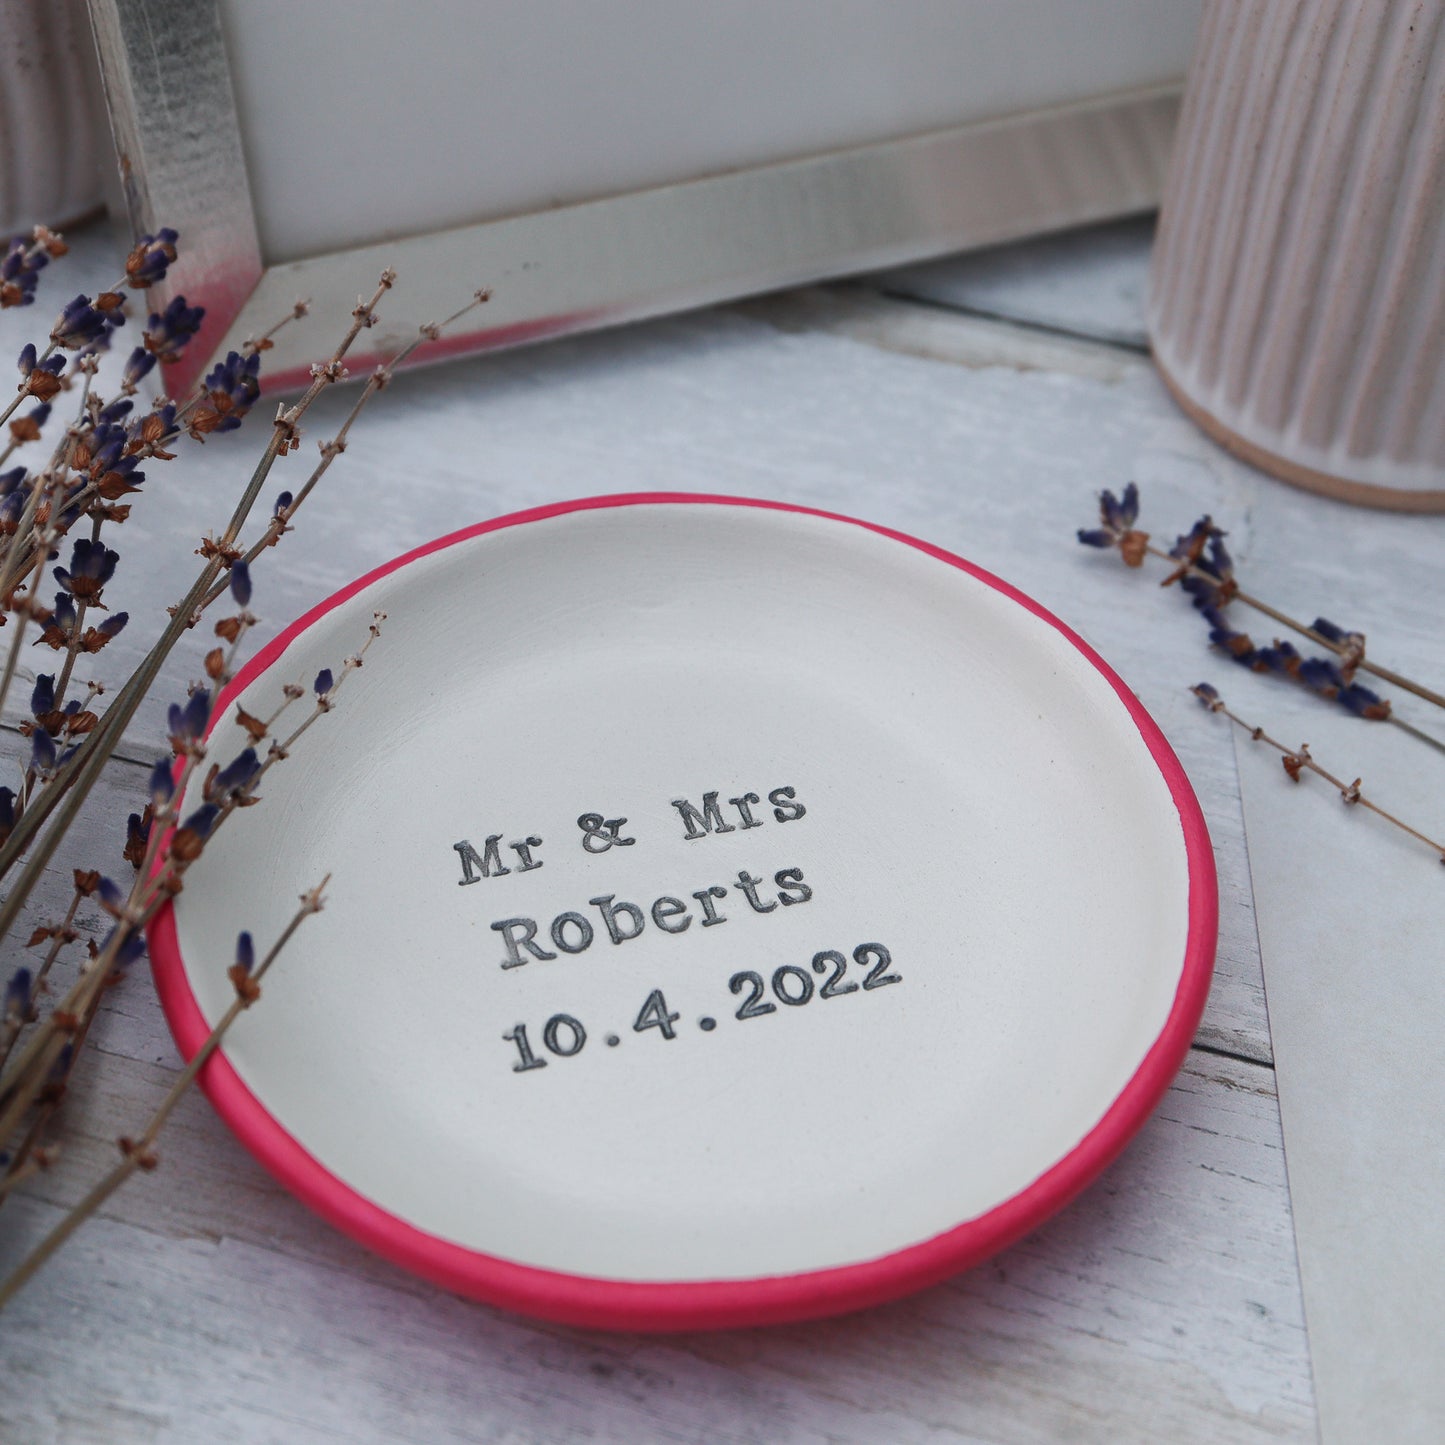 Personalised Mr and Mrs dish with date